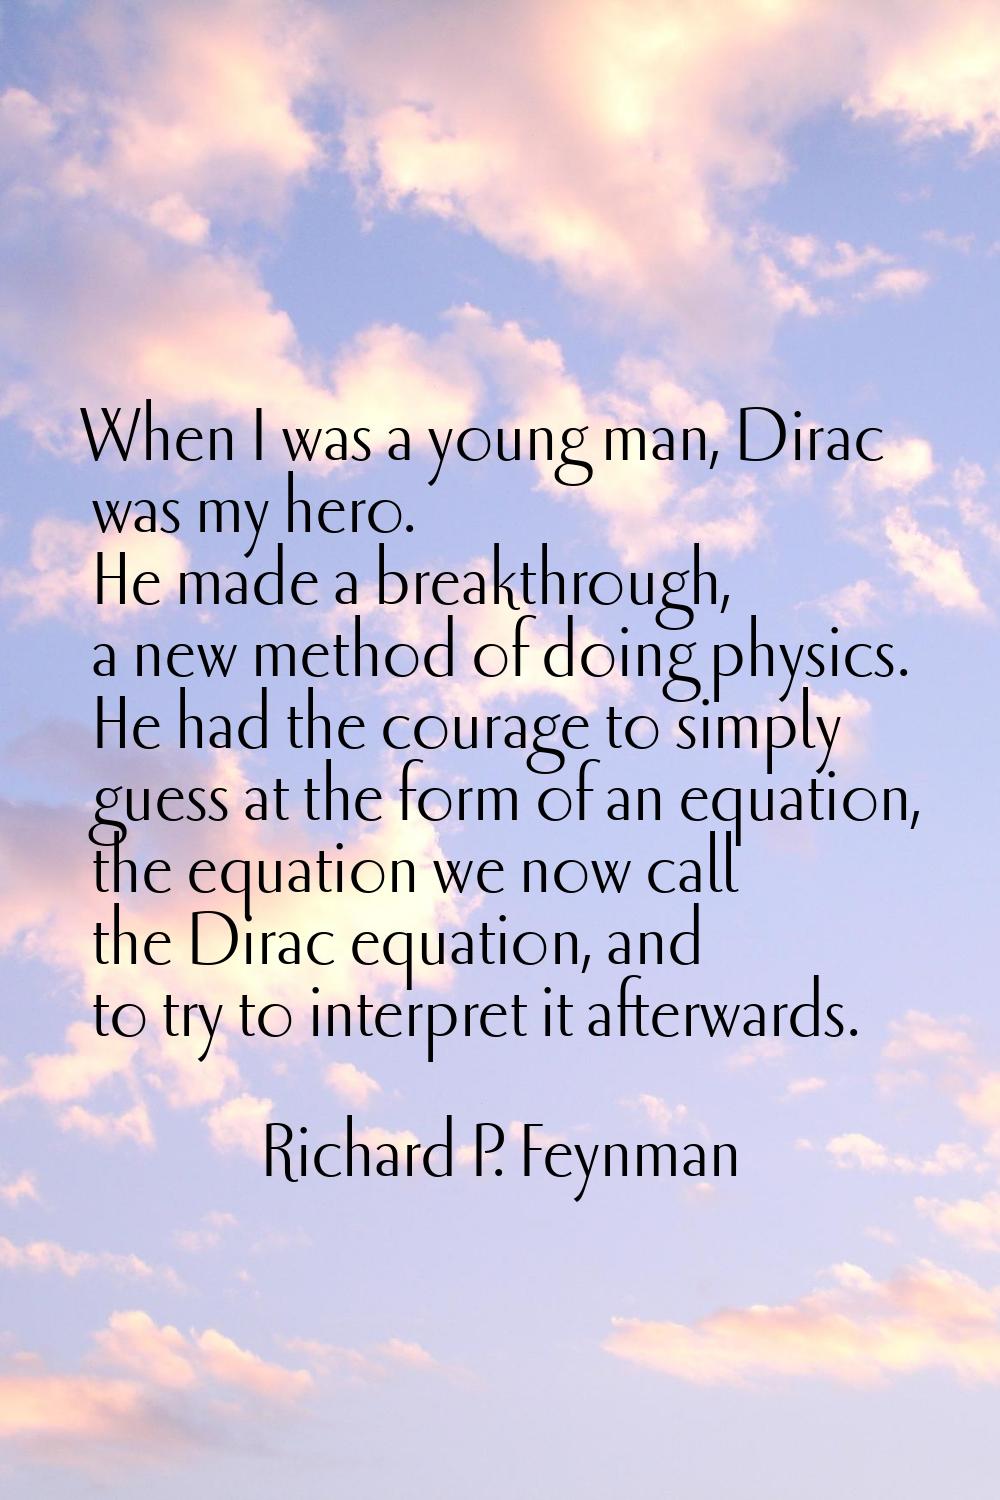 When I was a young man, Dirac was my hero. He made a breakthrough, a new method of doing physics. H